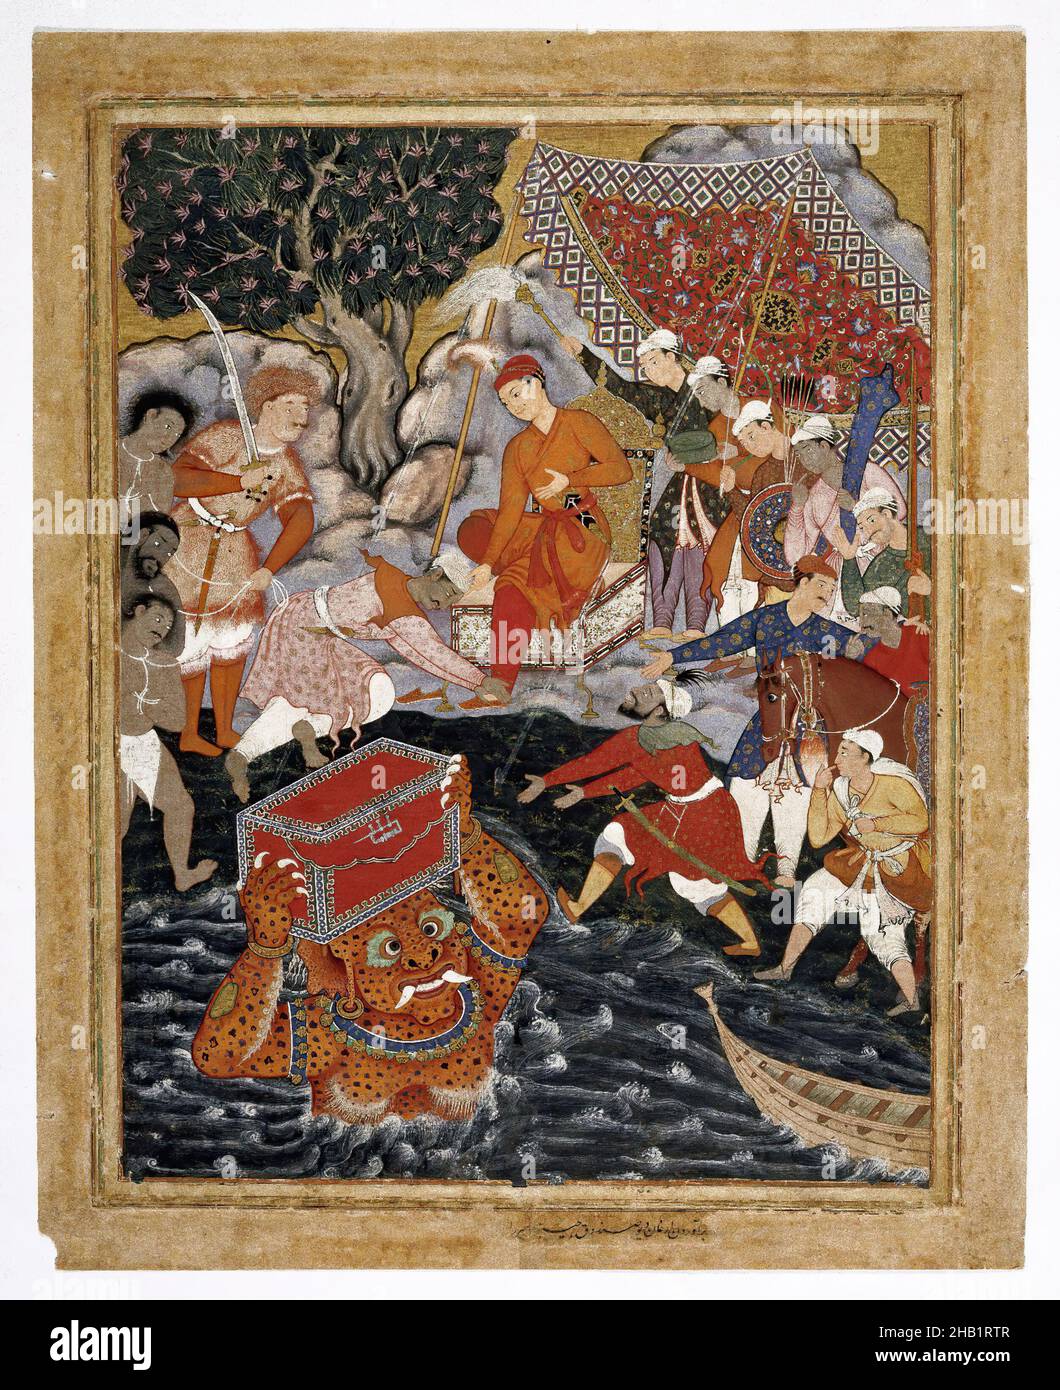 Arghan Div Brings the Chest of Armor to Hamza, Indian, Opaque watercolor and gold on cotton, India, 1562-1577, Mughal, sheet: 31 1/8 x 24 15/16 in., 79.1 x 63.3 cm, Arghan Div, armor, asian, chest, Cotton, demon, gift, gold, Hamza, Ifrit, India, indian, Indian Art, Indian Painting, lifestyle, men, monster, mughal, myth, mythic, mythical creature, rituals, sea, tree, trunk, Uncle, water, watercolor, Waves Stock Photo